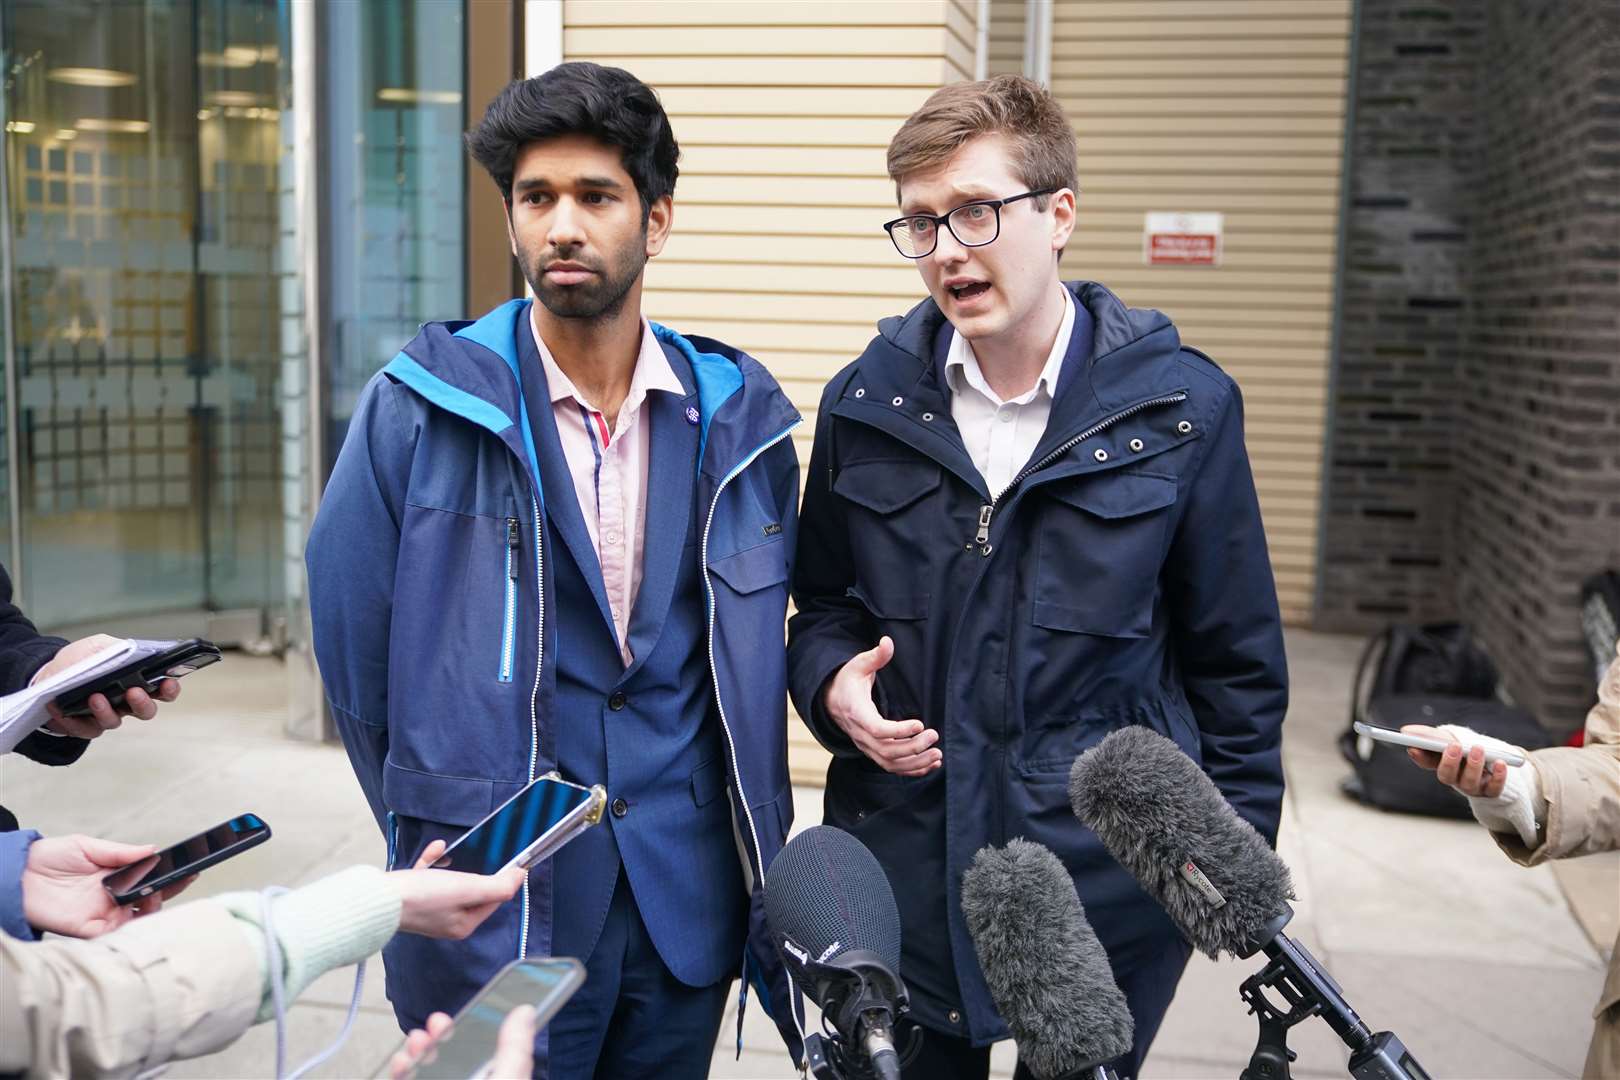 Co-chairs of the BMA’s junior doctors’ committee Vivek Trivedi and Rob Laurenson (Yui Mok/PA)